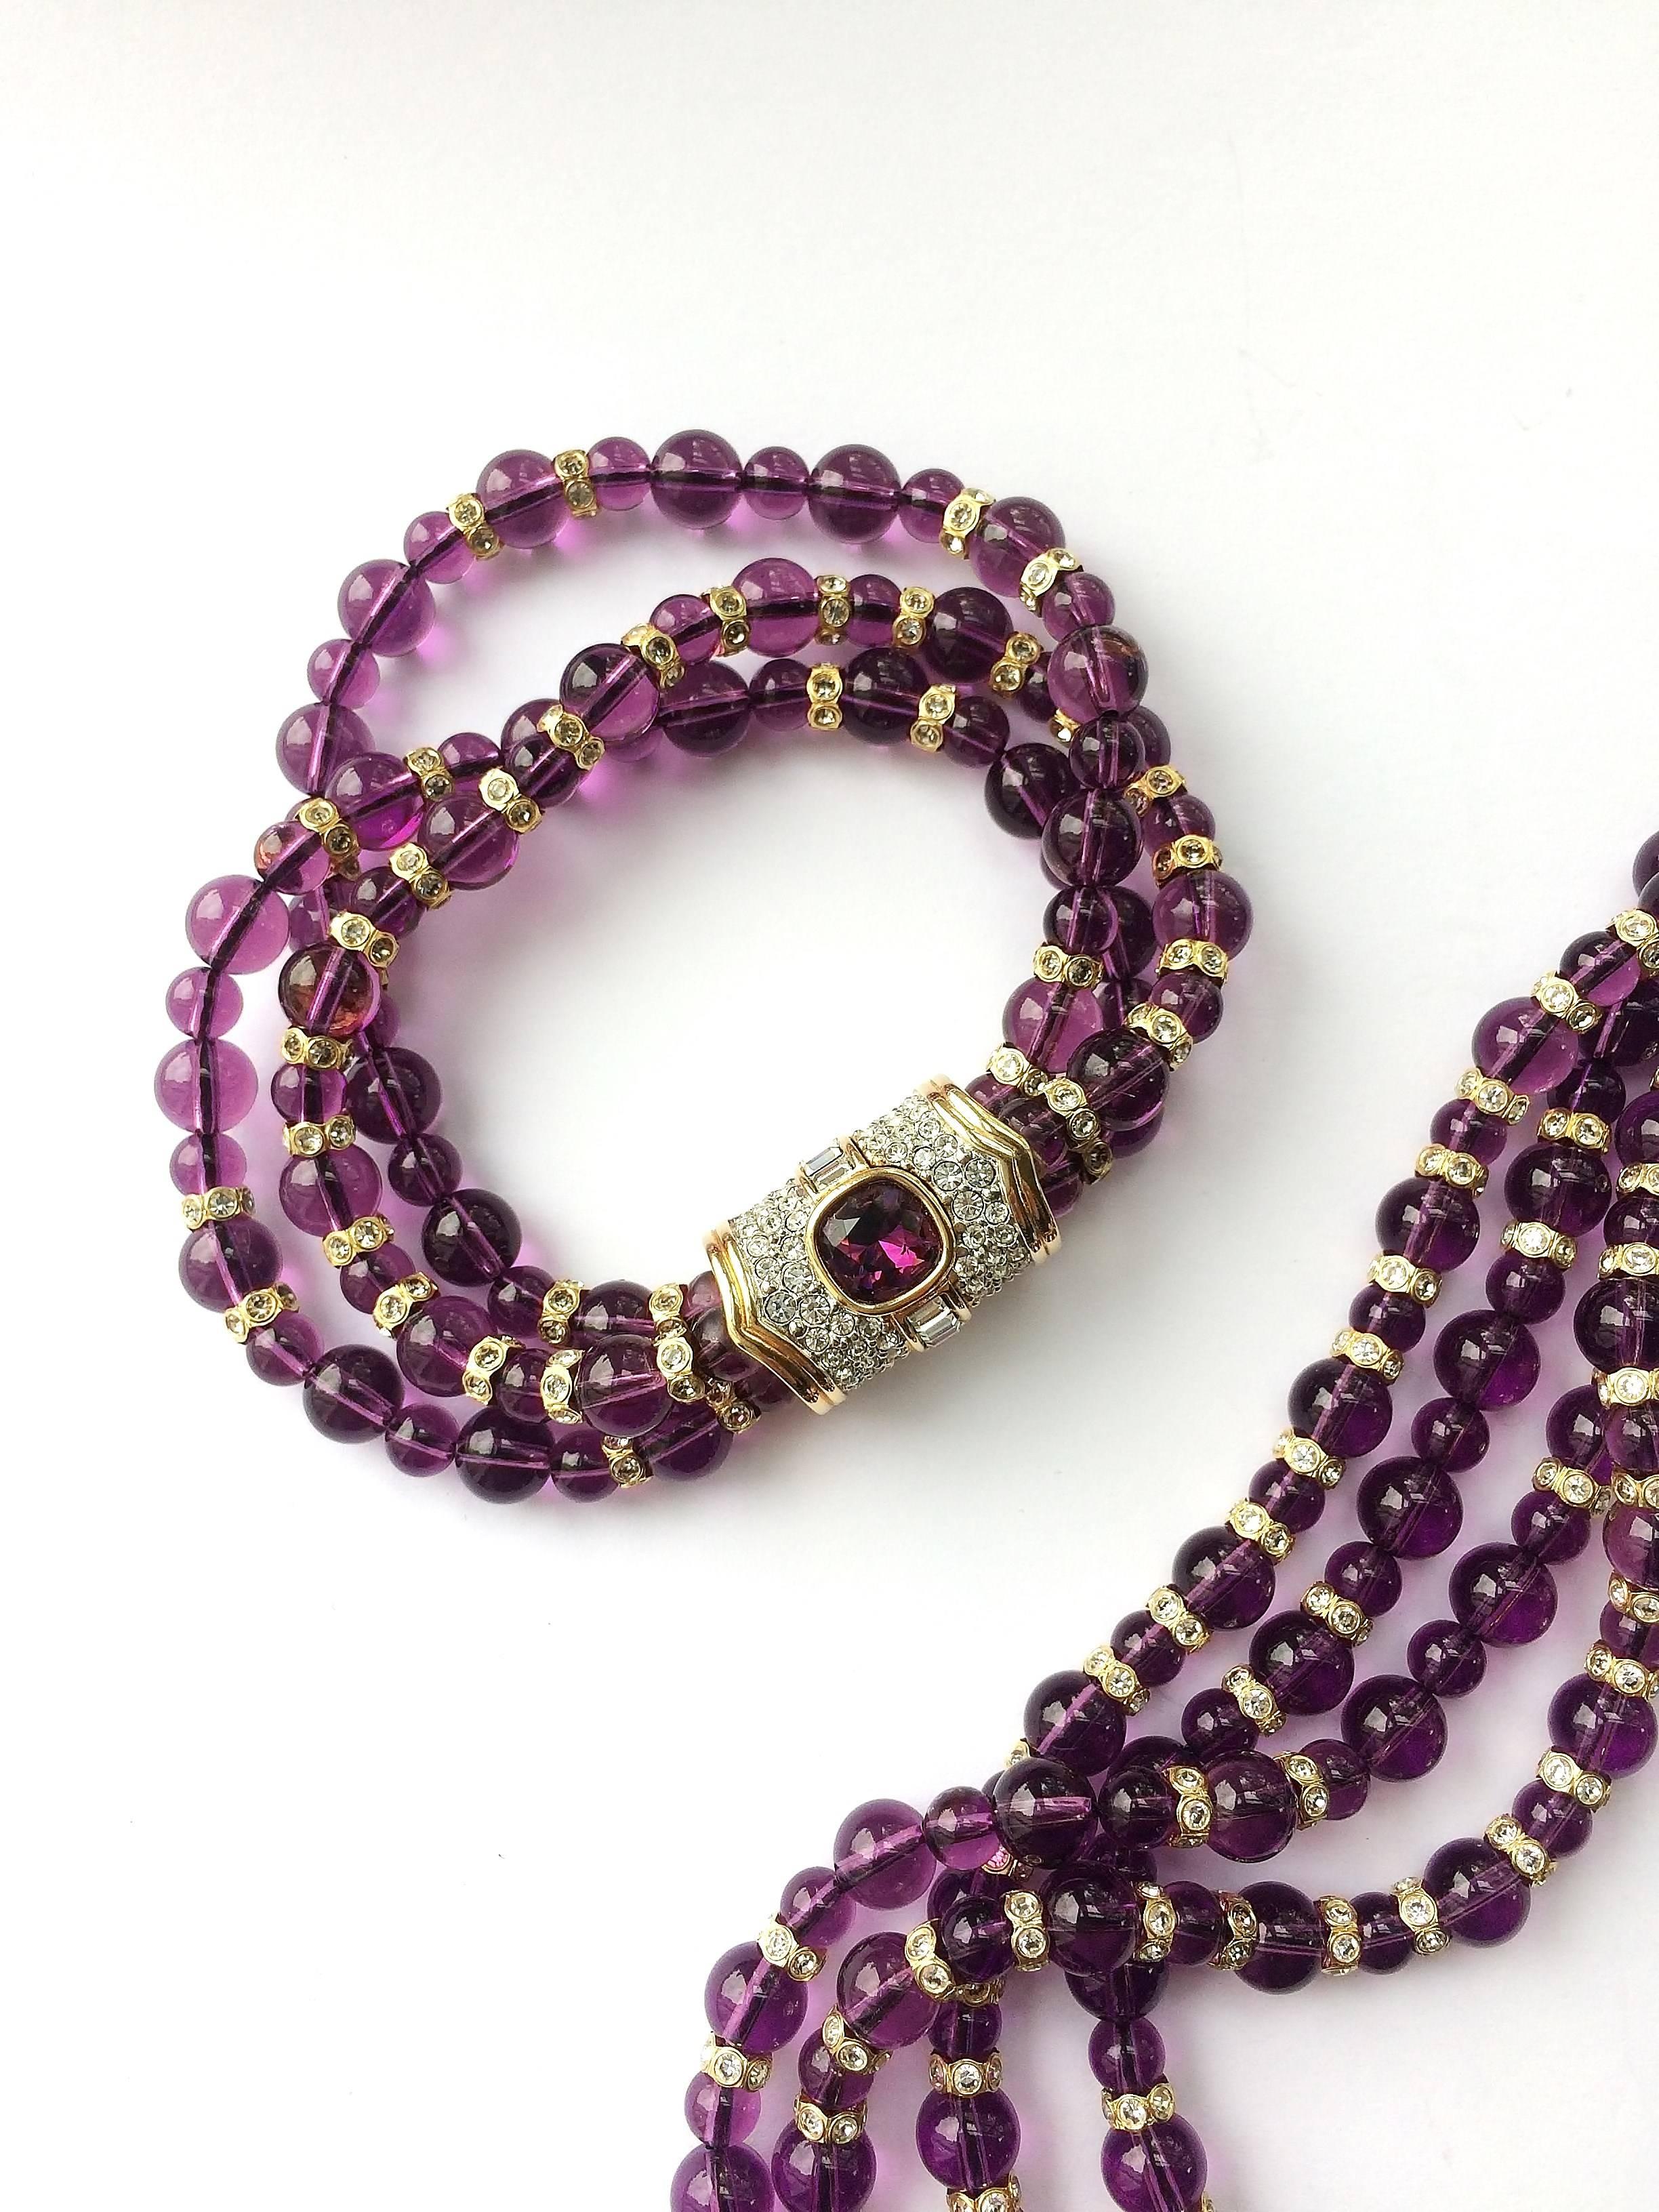 This is a wonderful set in great condition. Dark Amethyst coloured glass beads are interspaced with Swarovski crystal and gilt elements that give great light and character to the pieces and the necklace and bracelet have stunning heavily rhinestoned